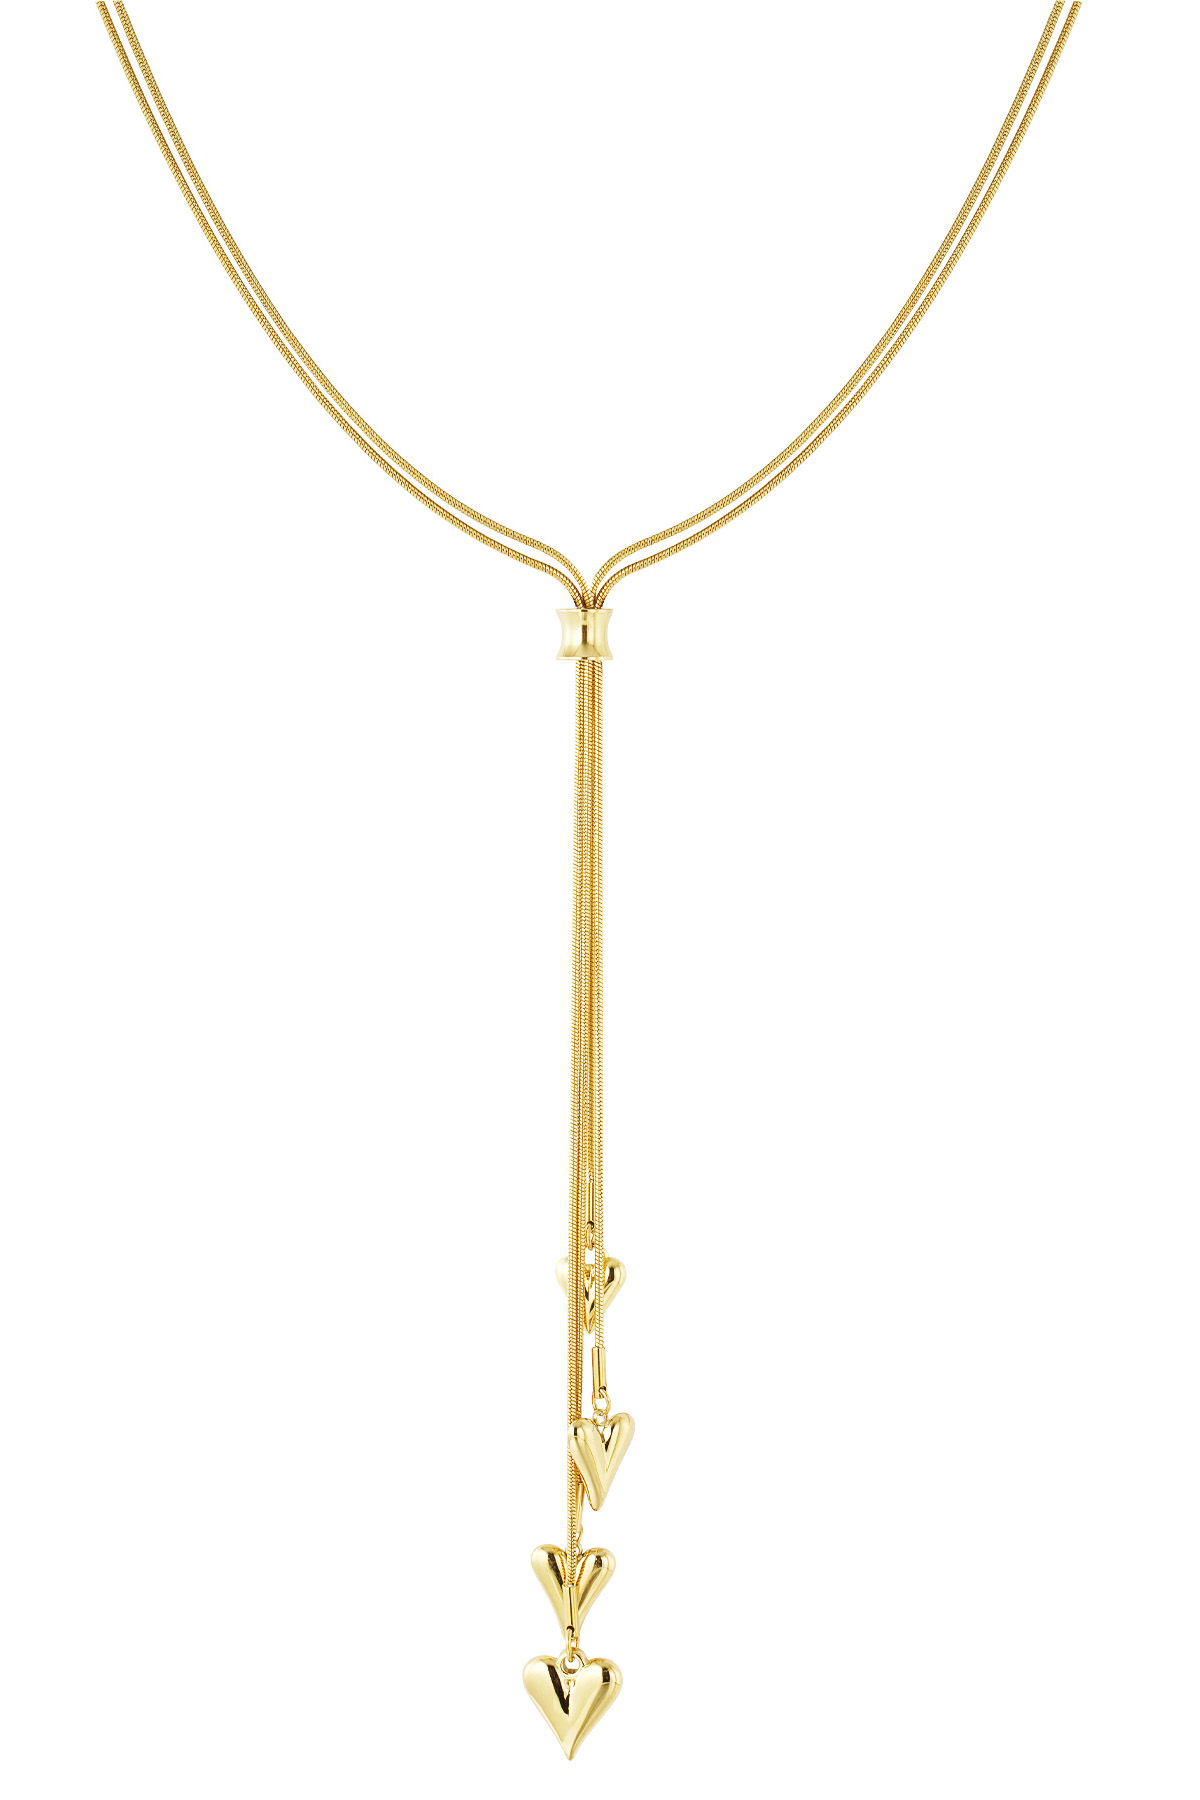 Long necklace with heart charms - gold 